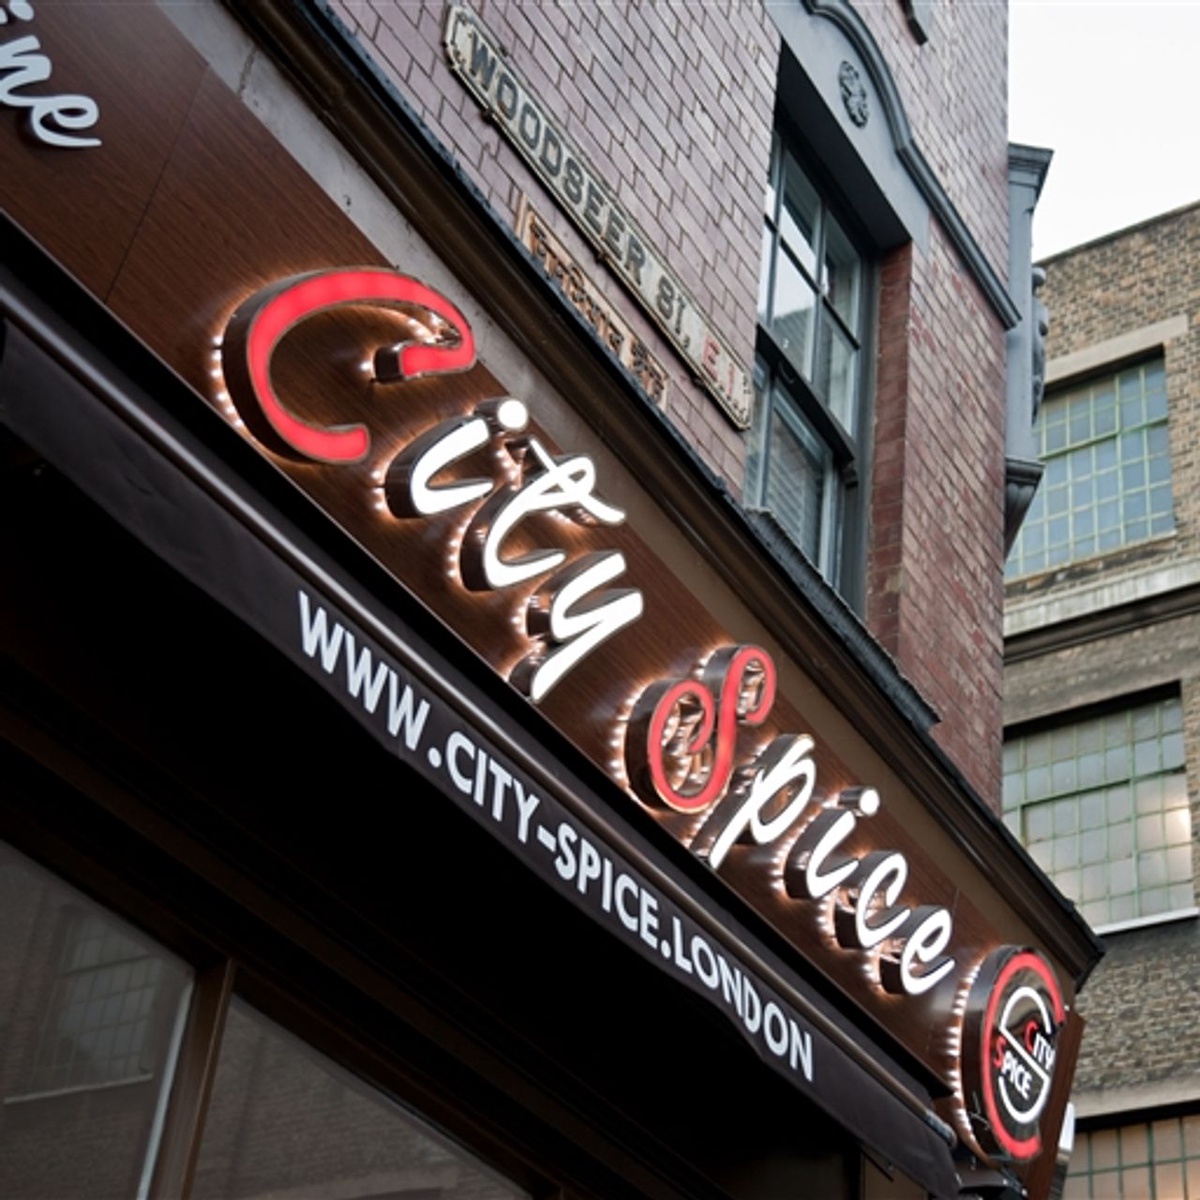 5 POINTS TO CONSIDER WHILE CHOOSING A RESTAURANT IN BRICK LANE